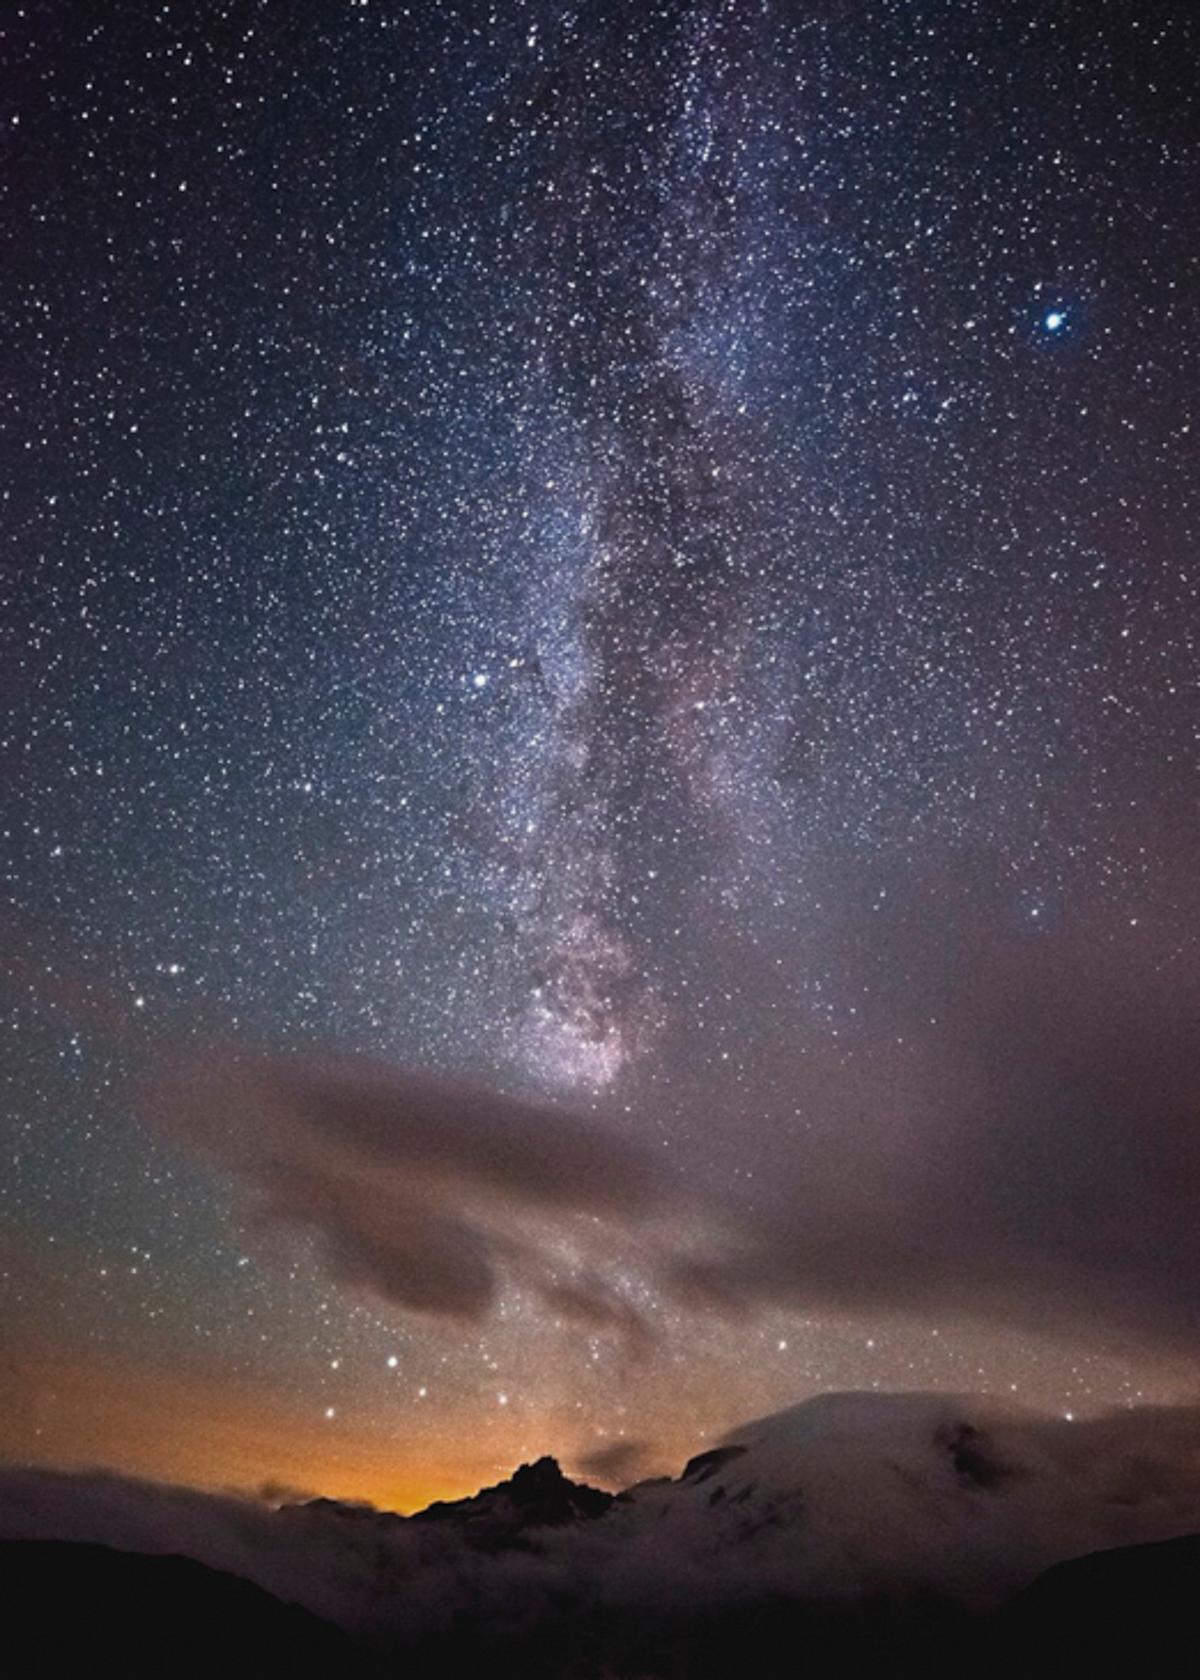 The sight of the Milky Way in a dark sky is breath taking. The camera and digital processing pick-up more stars than what see with the naked eye of the majestic Milky Way above Mt. Rainer, WA. (Cat Rooney)